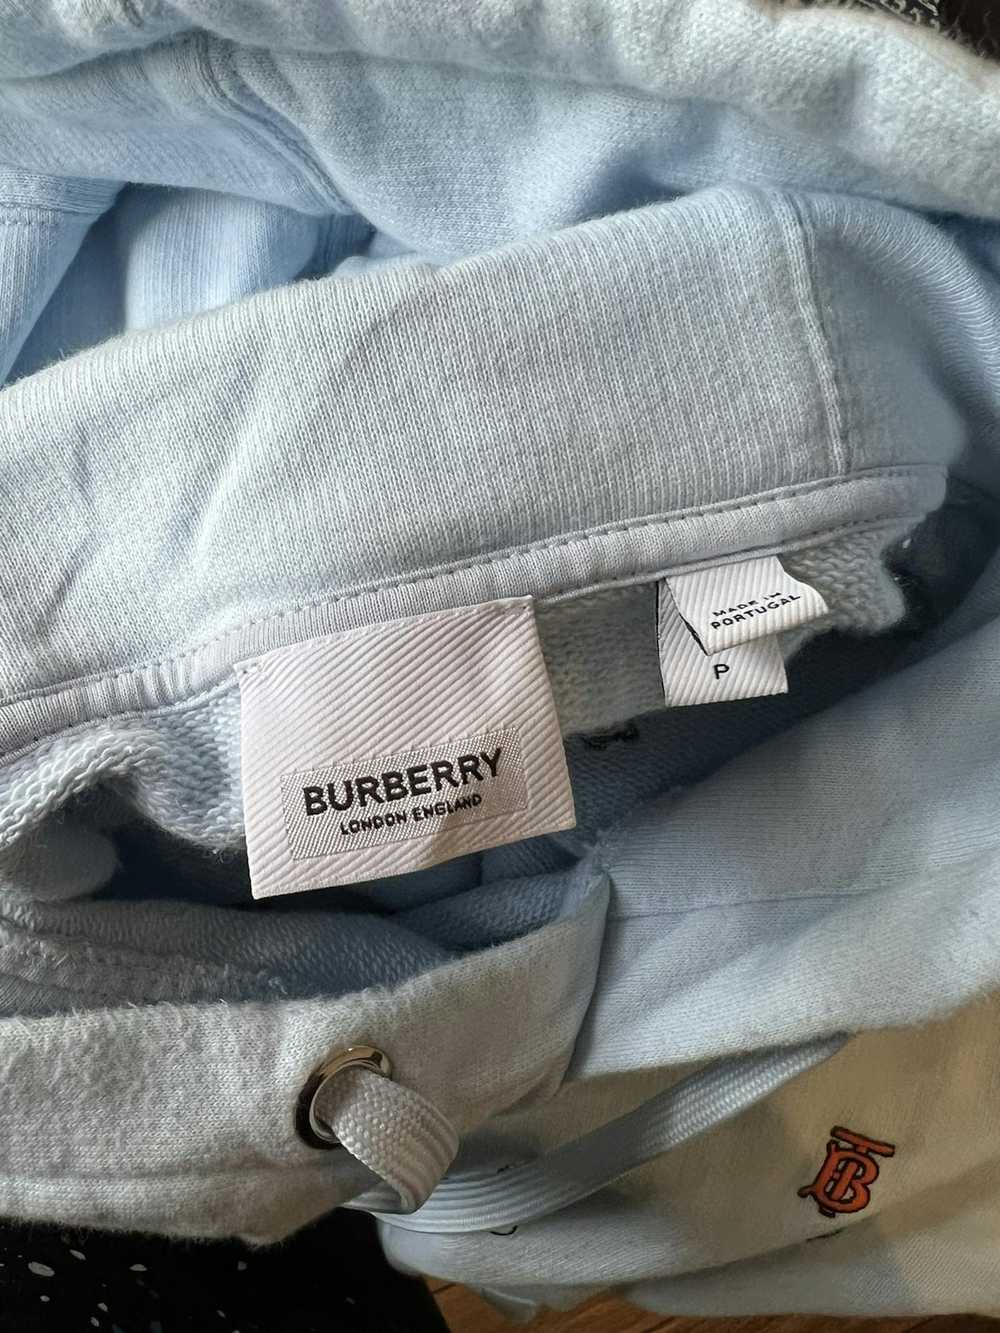 Burberry Burberry Embroidered Hoodie - image 3